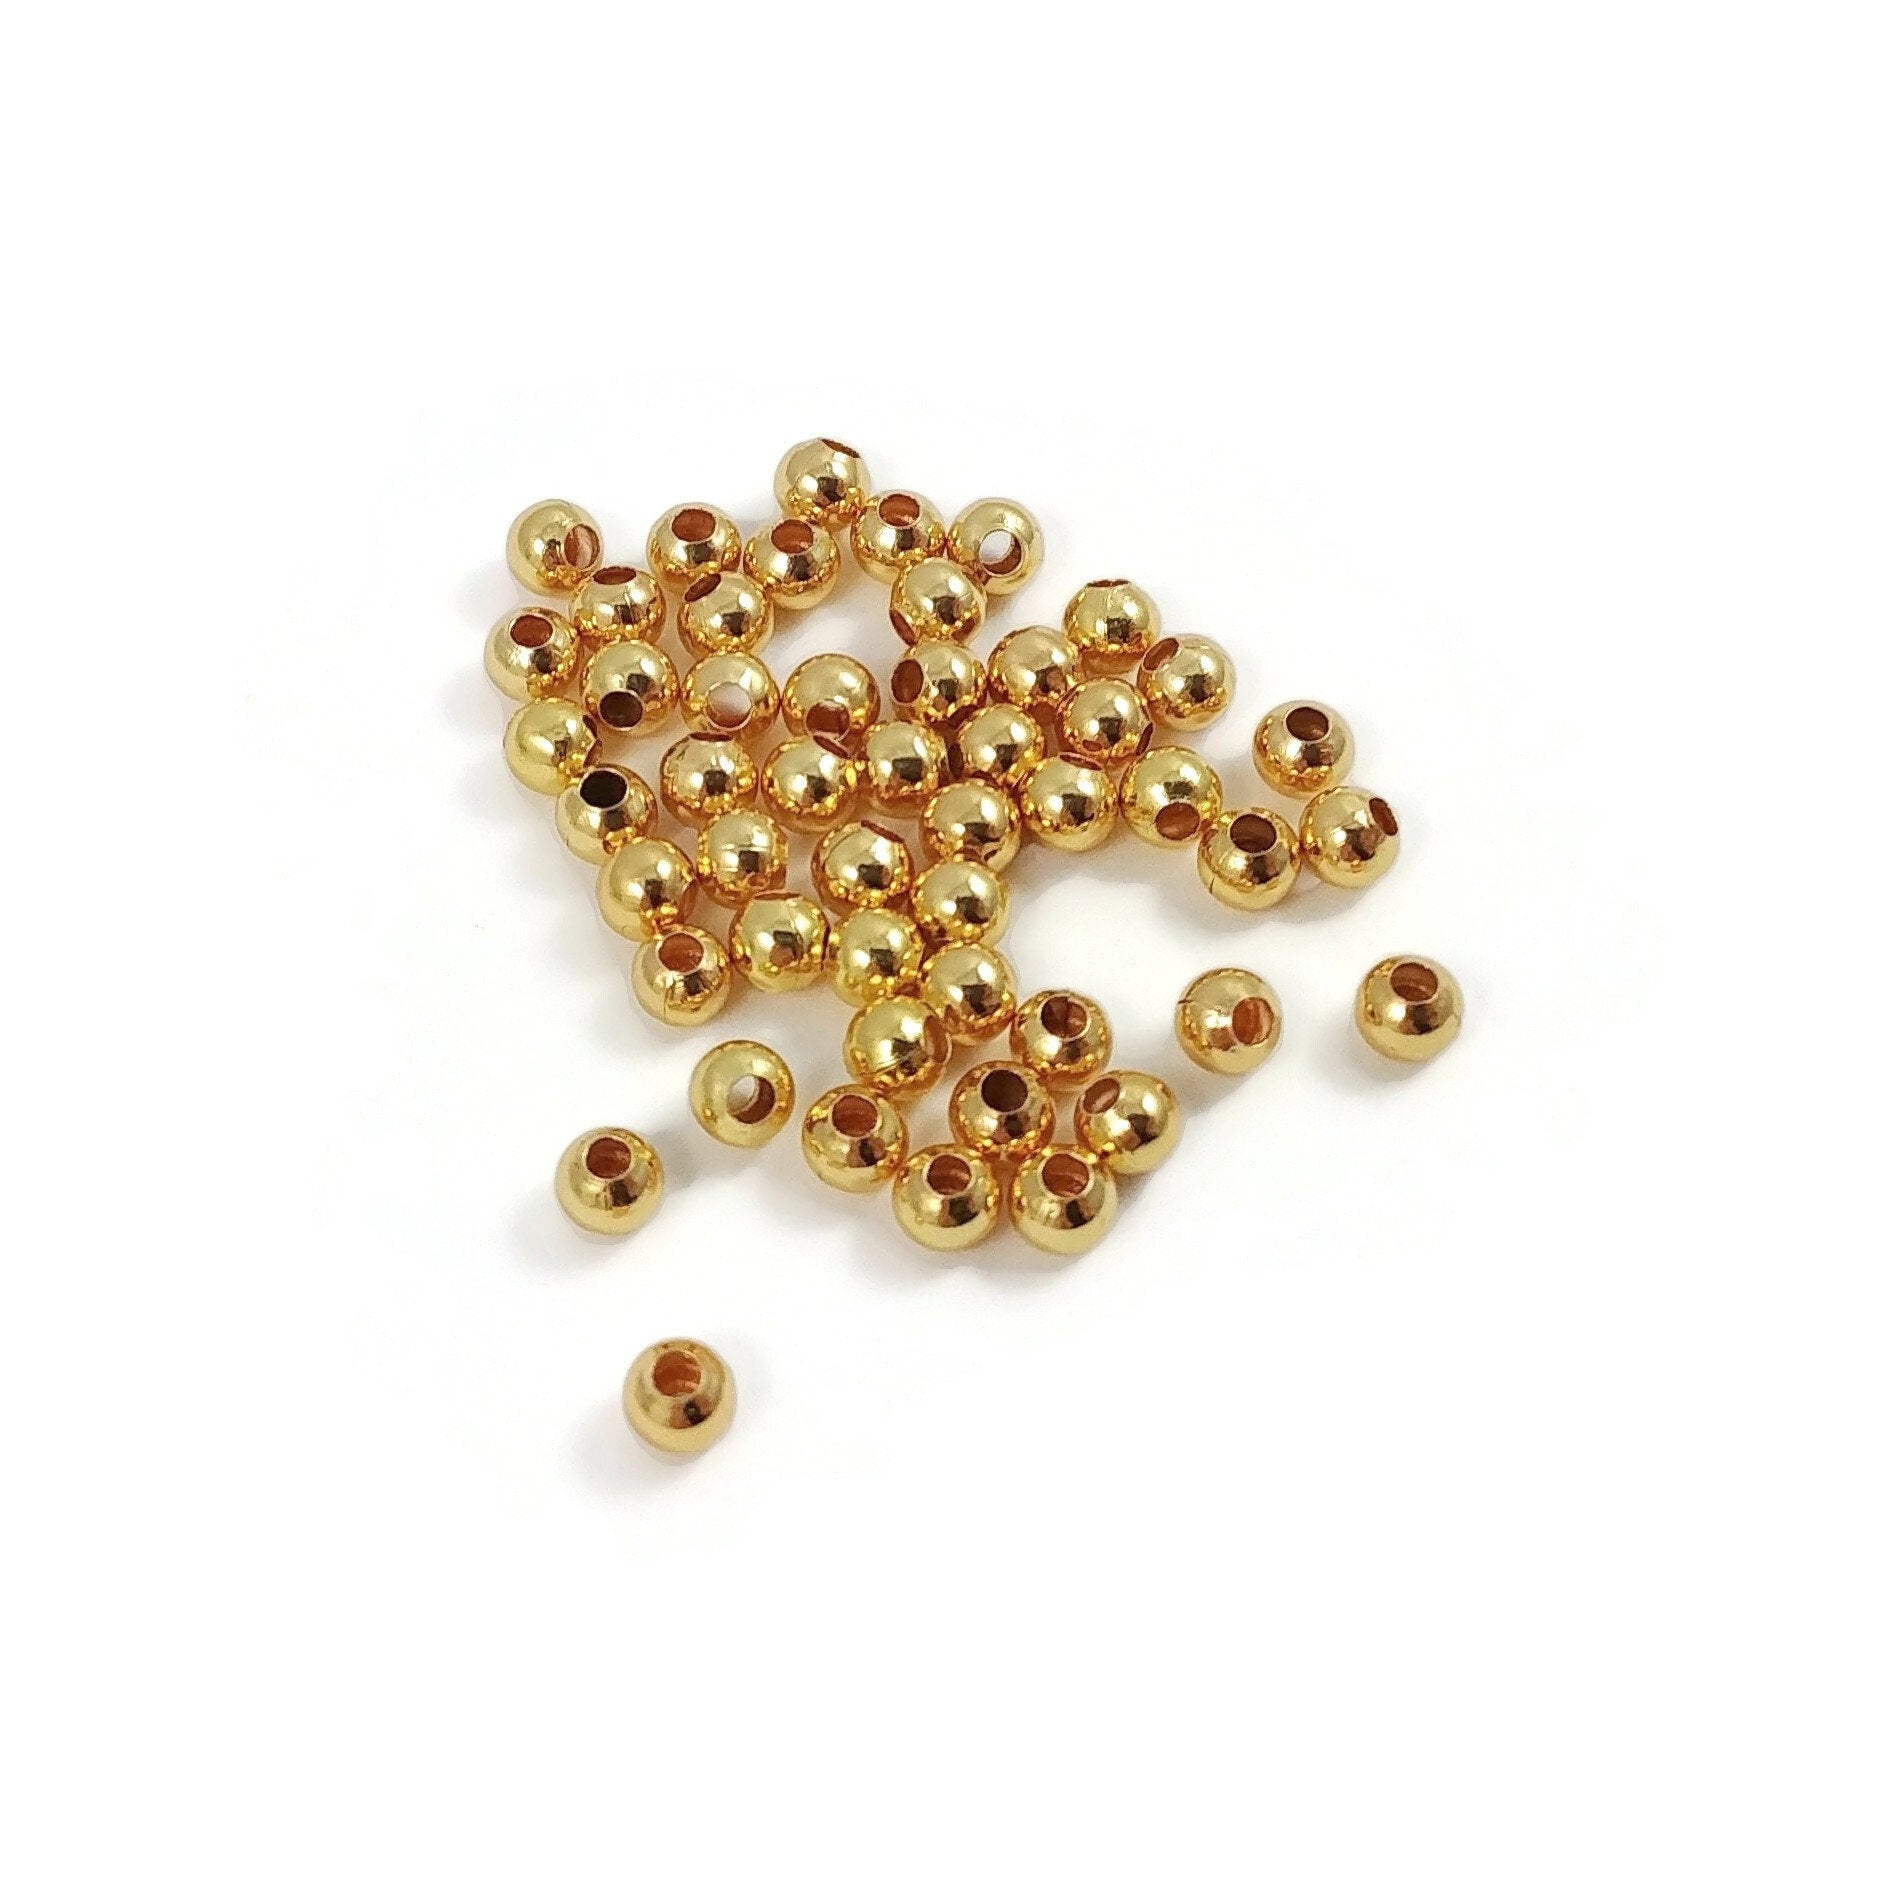 5mm Rondelle Spacer Beads, Antique Brass - Golden Age Beads